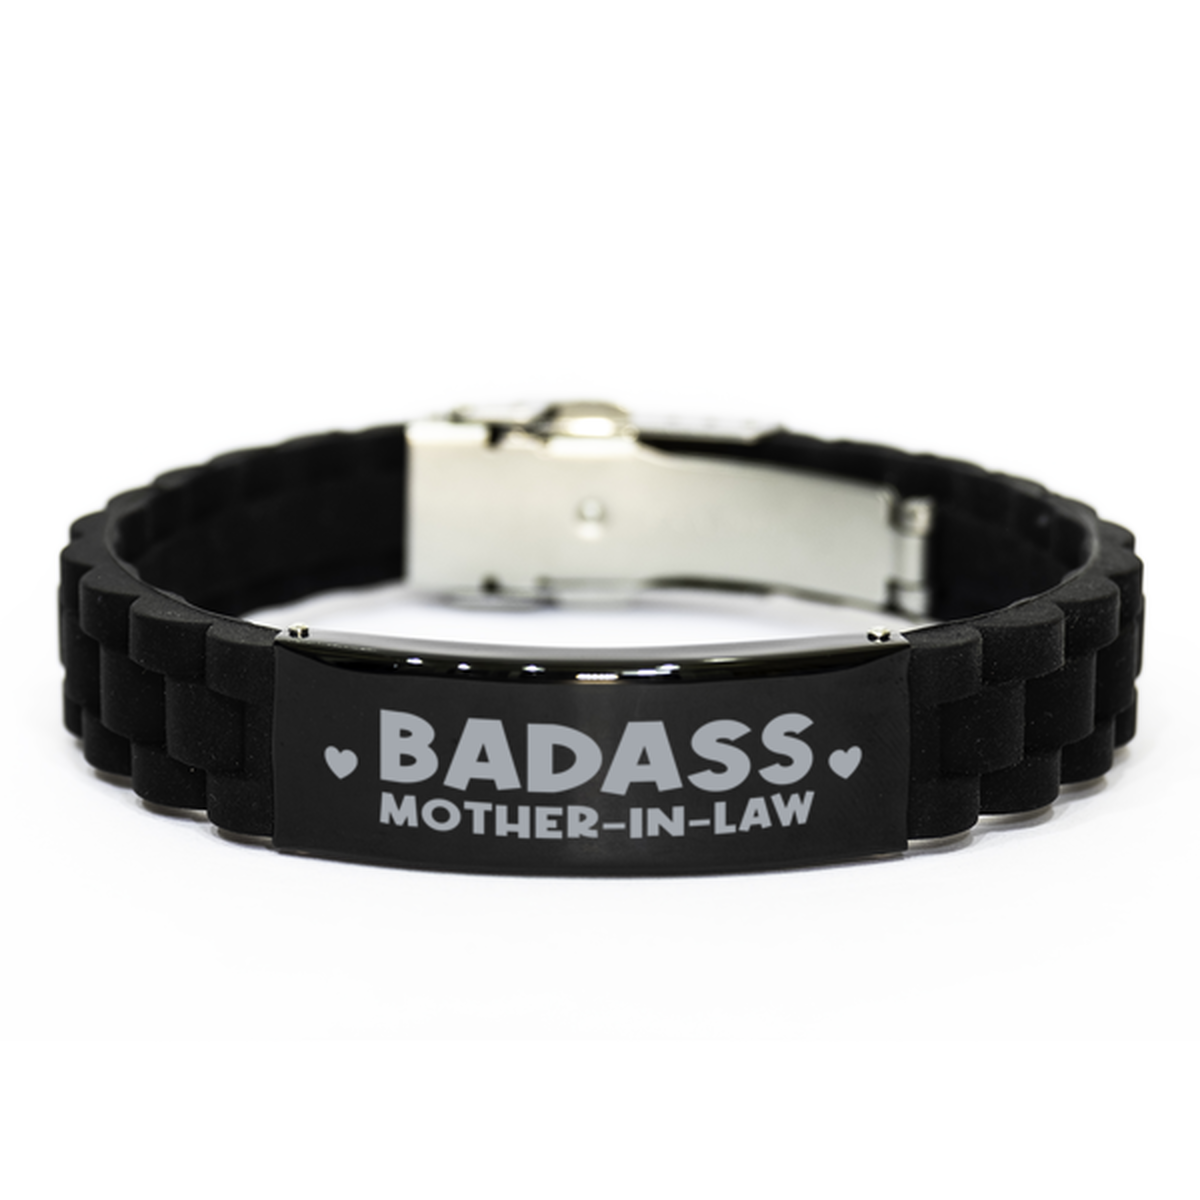 Mother-in-law Black Bracelet, Badass Mother-in-law, Funny Family Gifts For Mother-in-law From Son Daughter